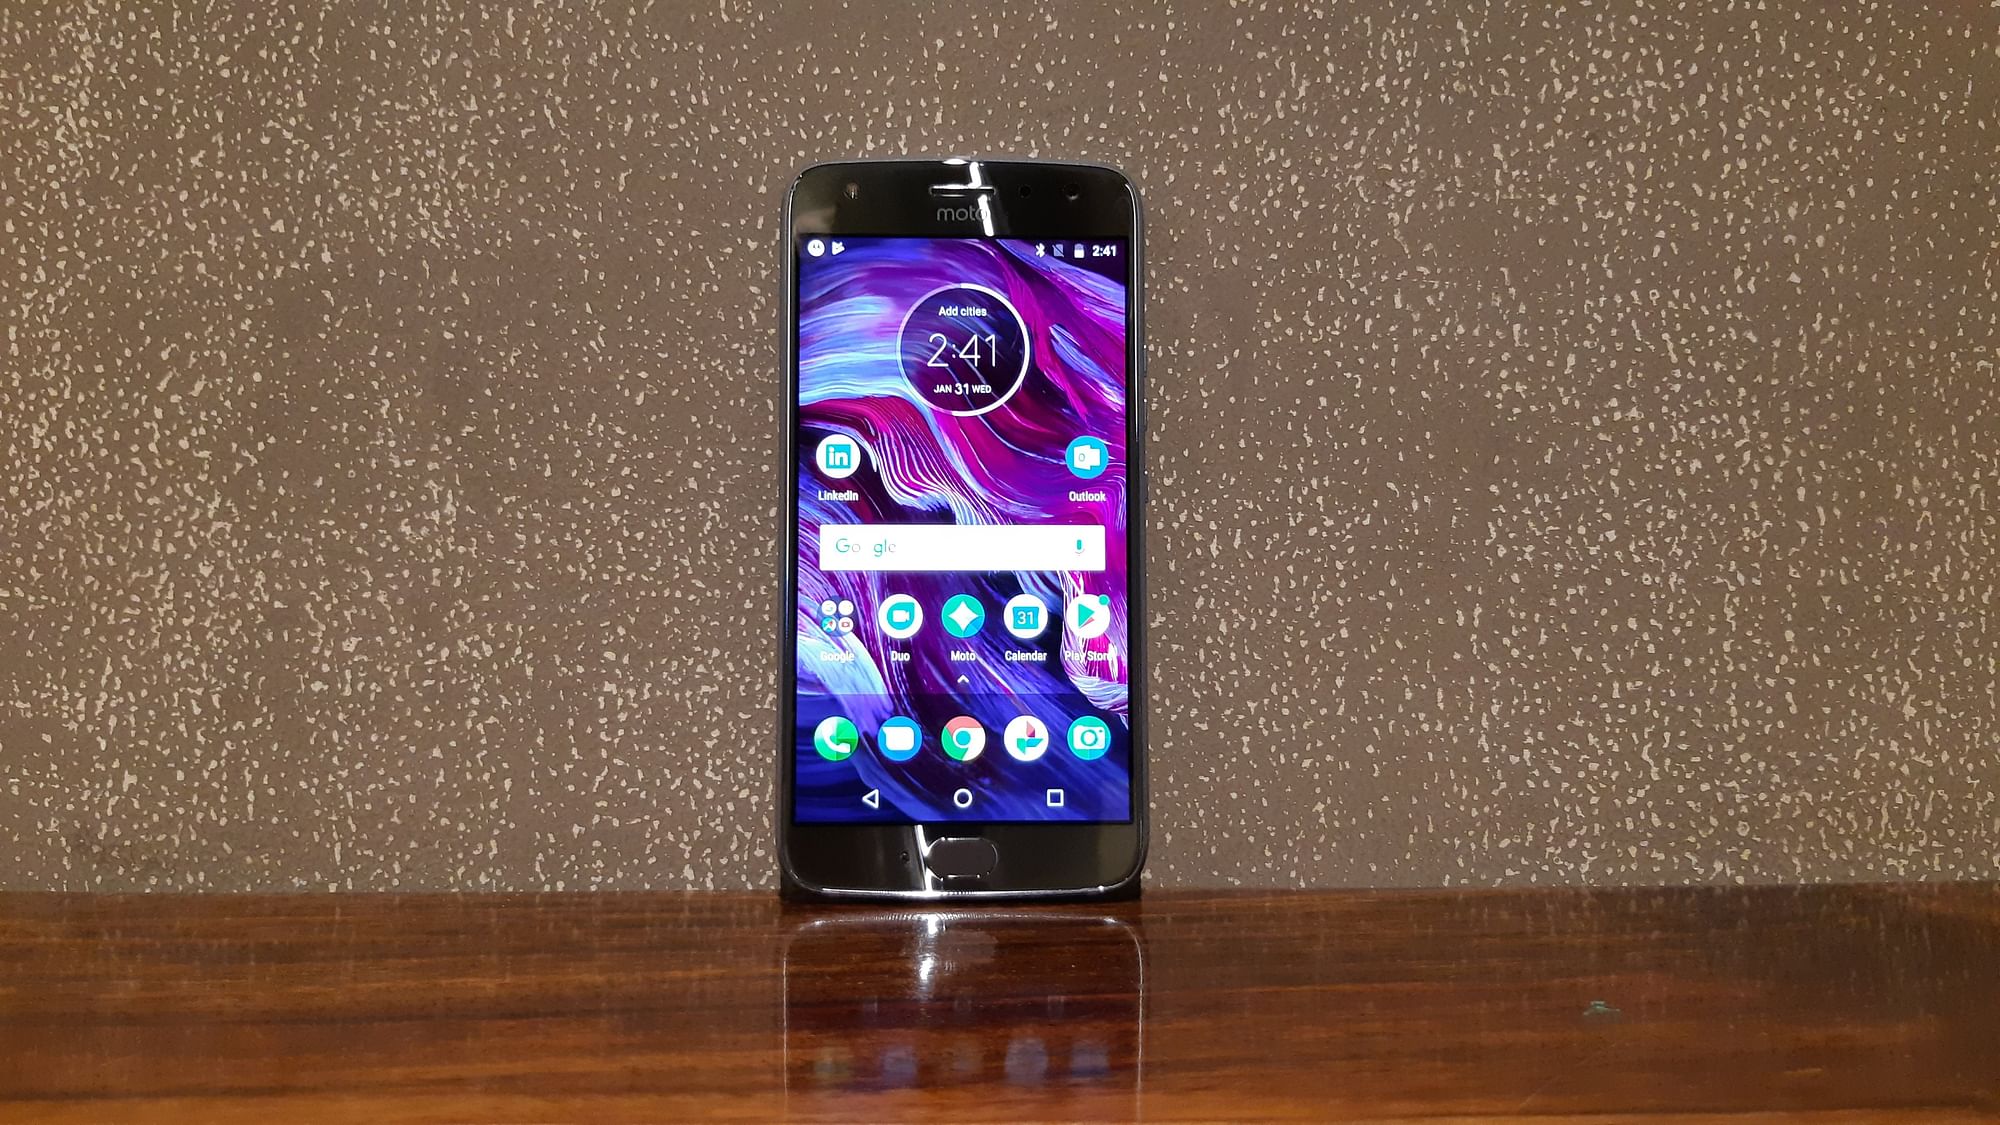 The new Moto X4 comes with 6GB RAM